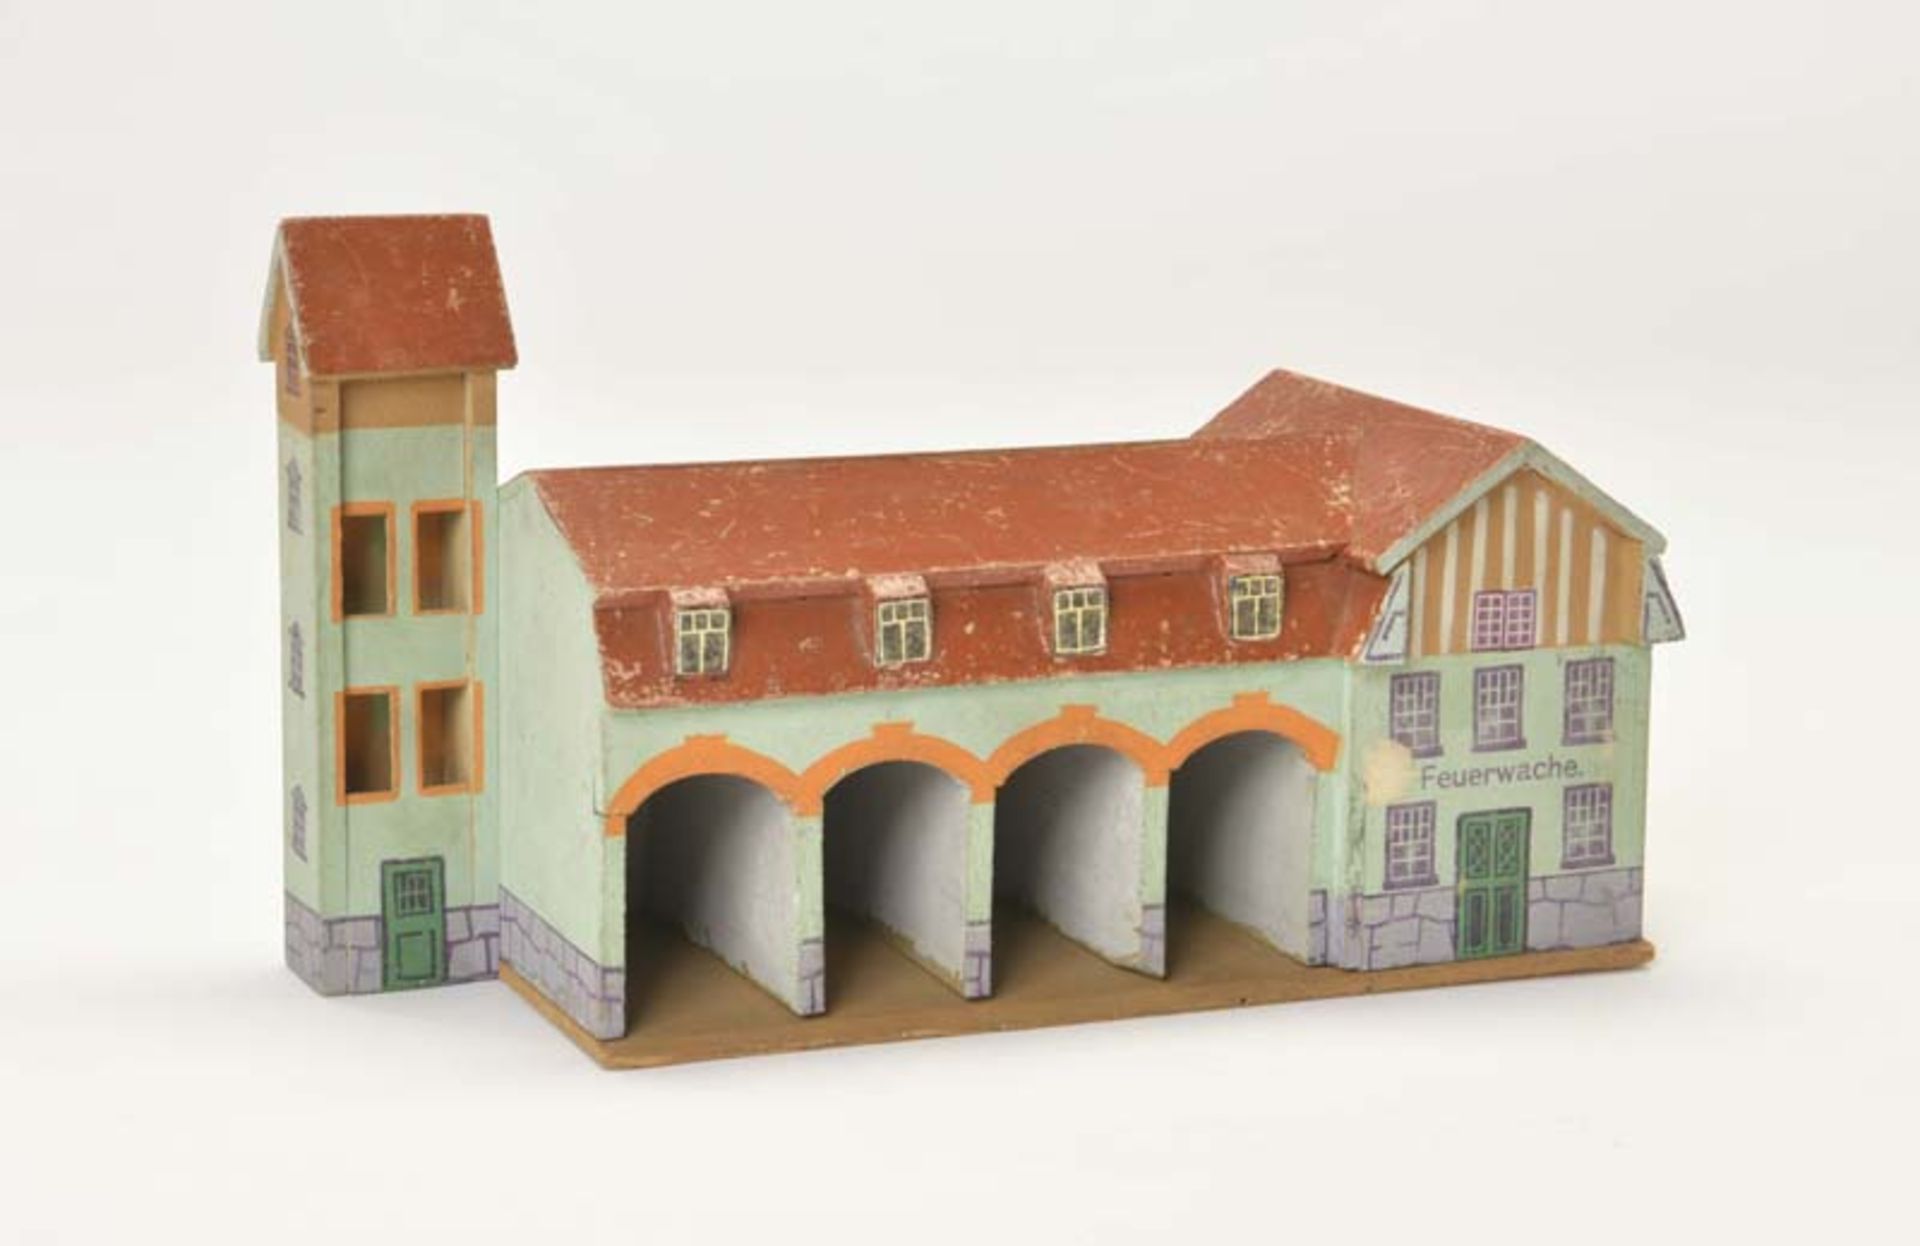 Erzgebirge, Fire Station with Tower for Miniatures, Germany pw, paint due to age, C 2